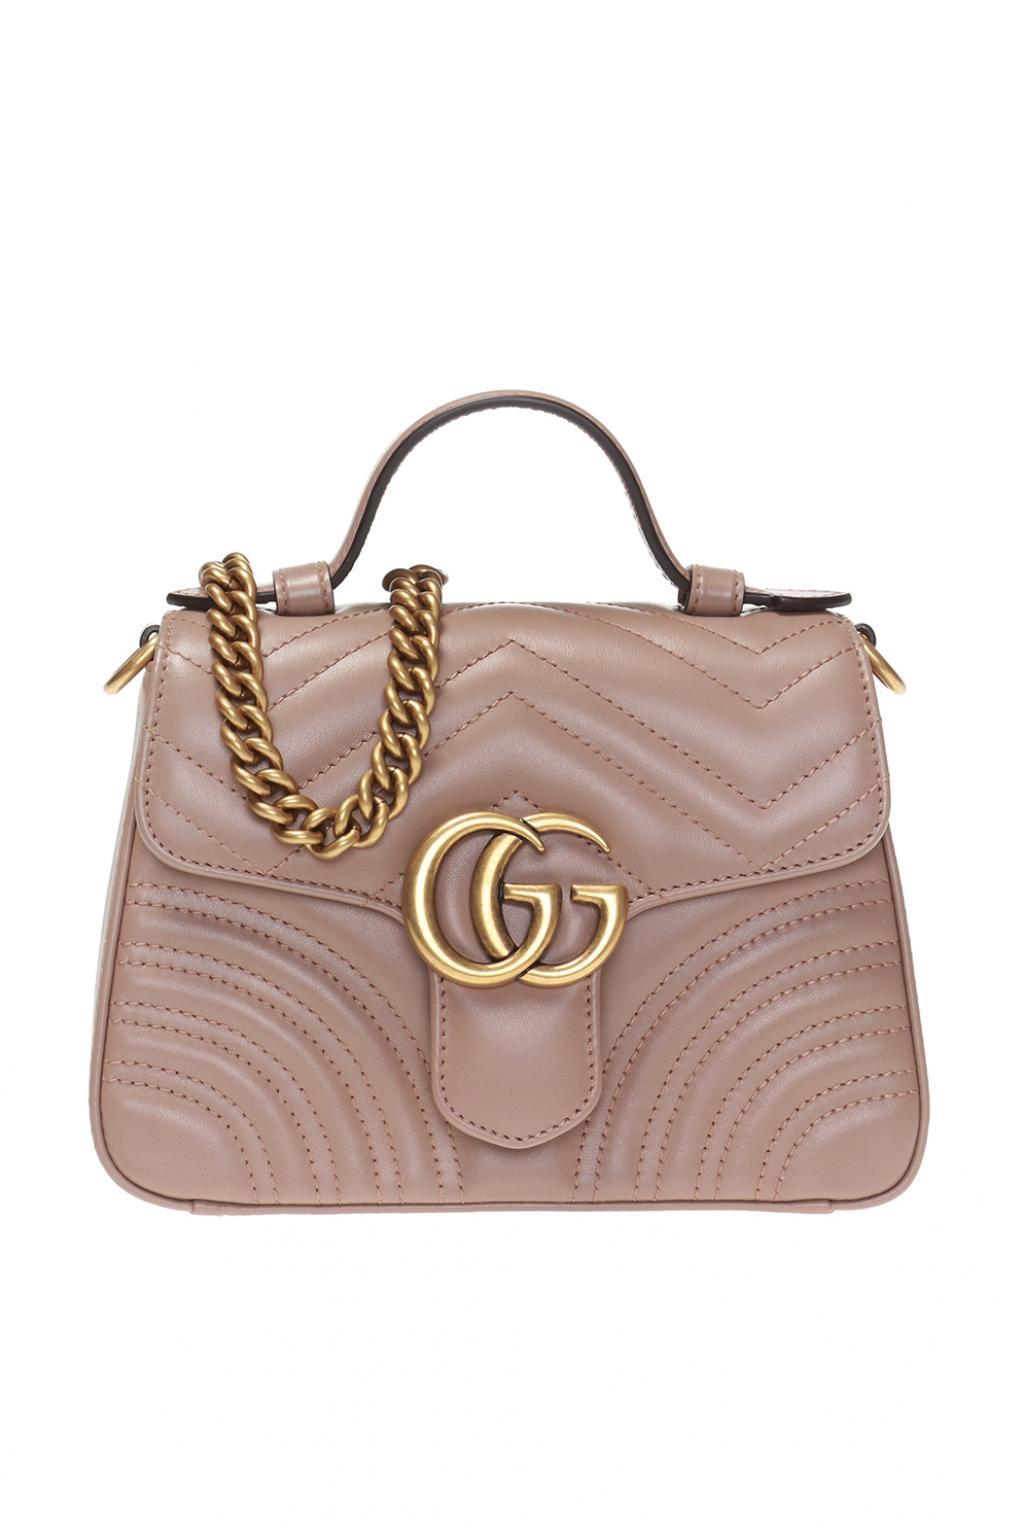 Gucci Leather &#39;GG Marmont&#39; Shoulder Bag in Black Brown Red Cream (Brown) - Lyst